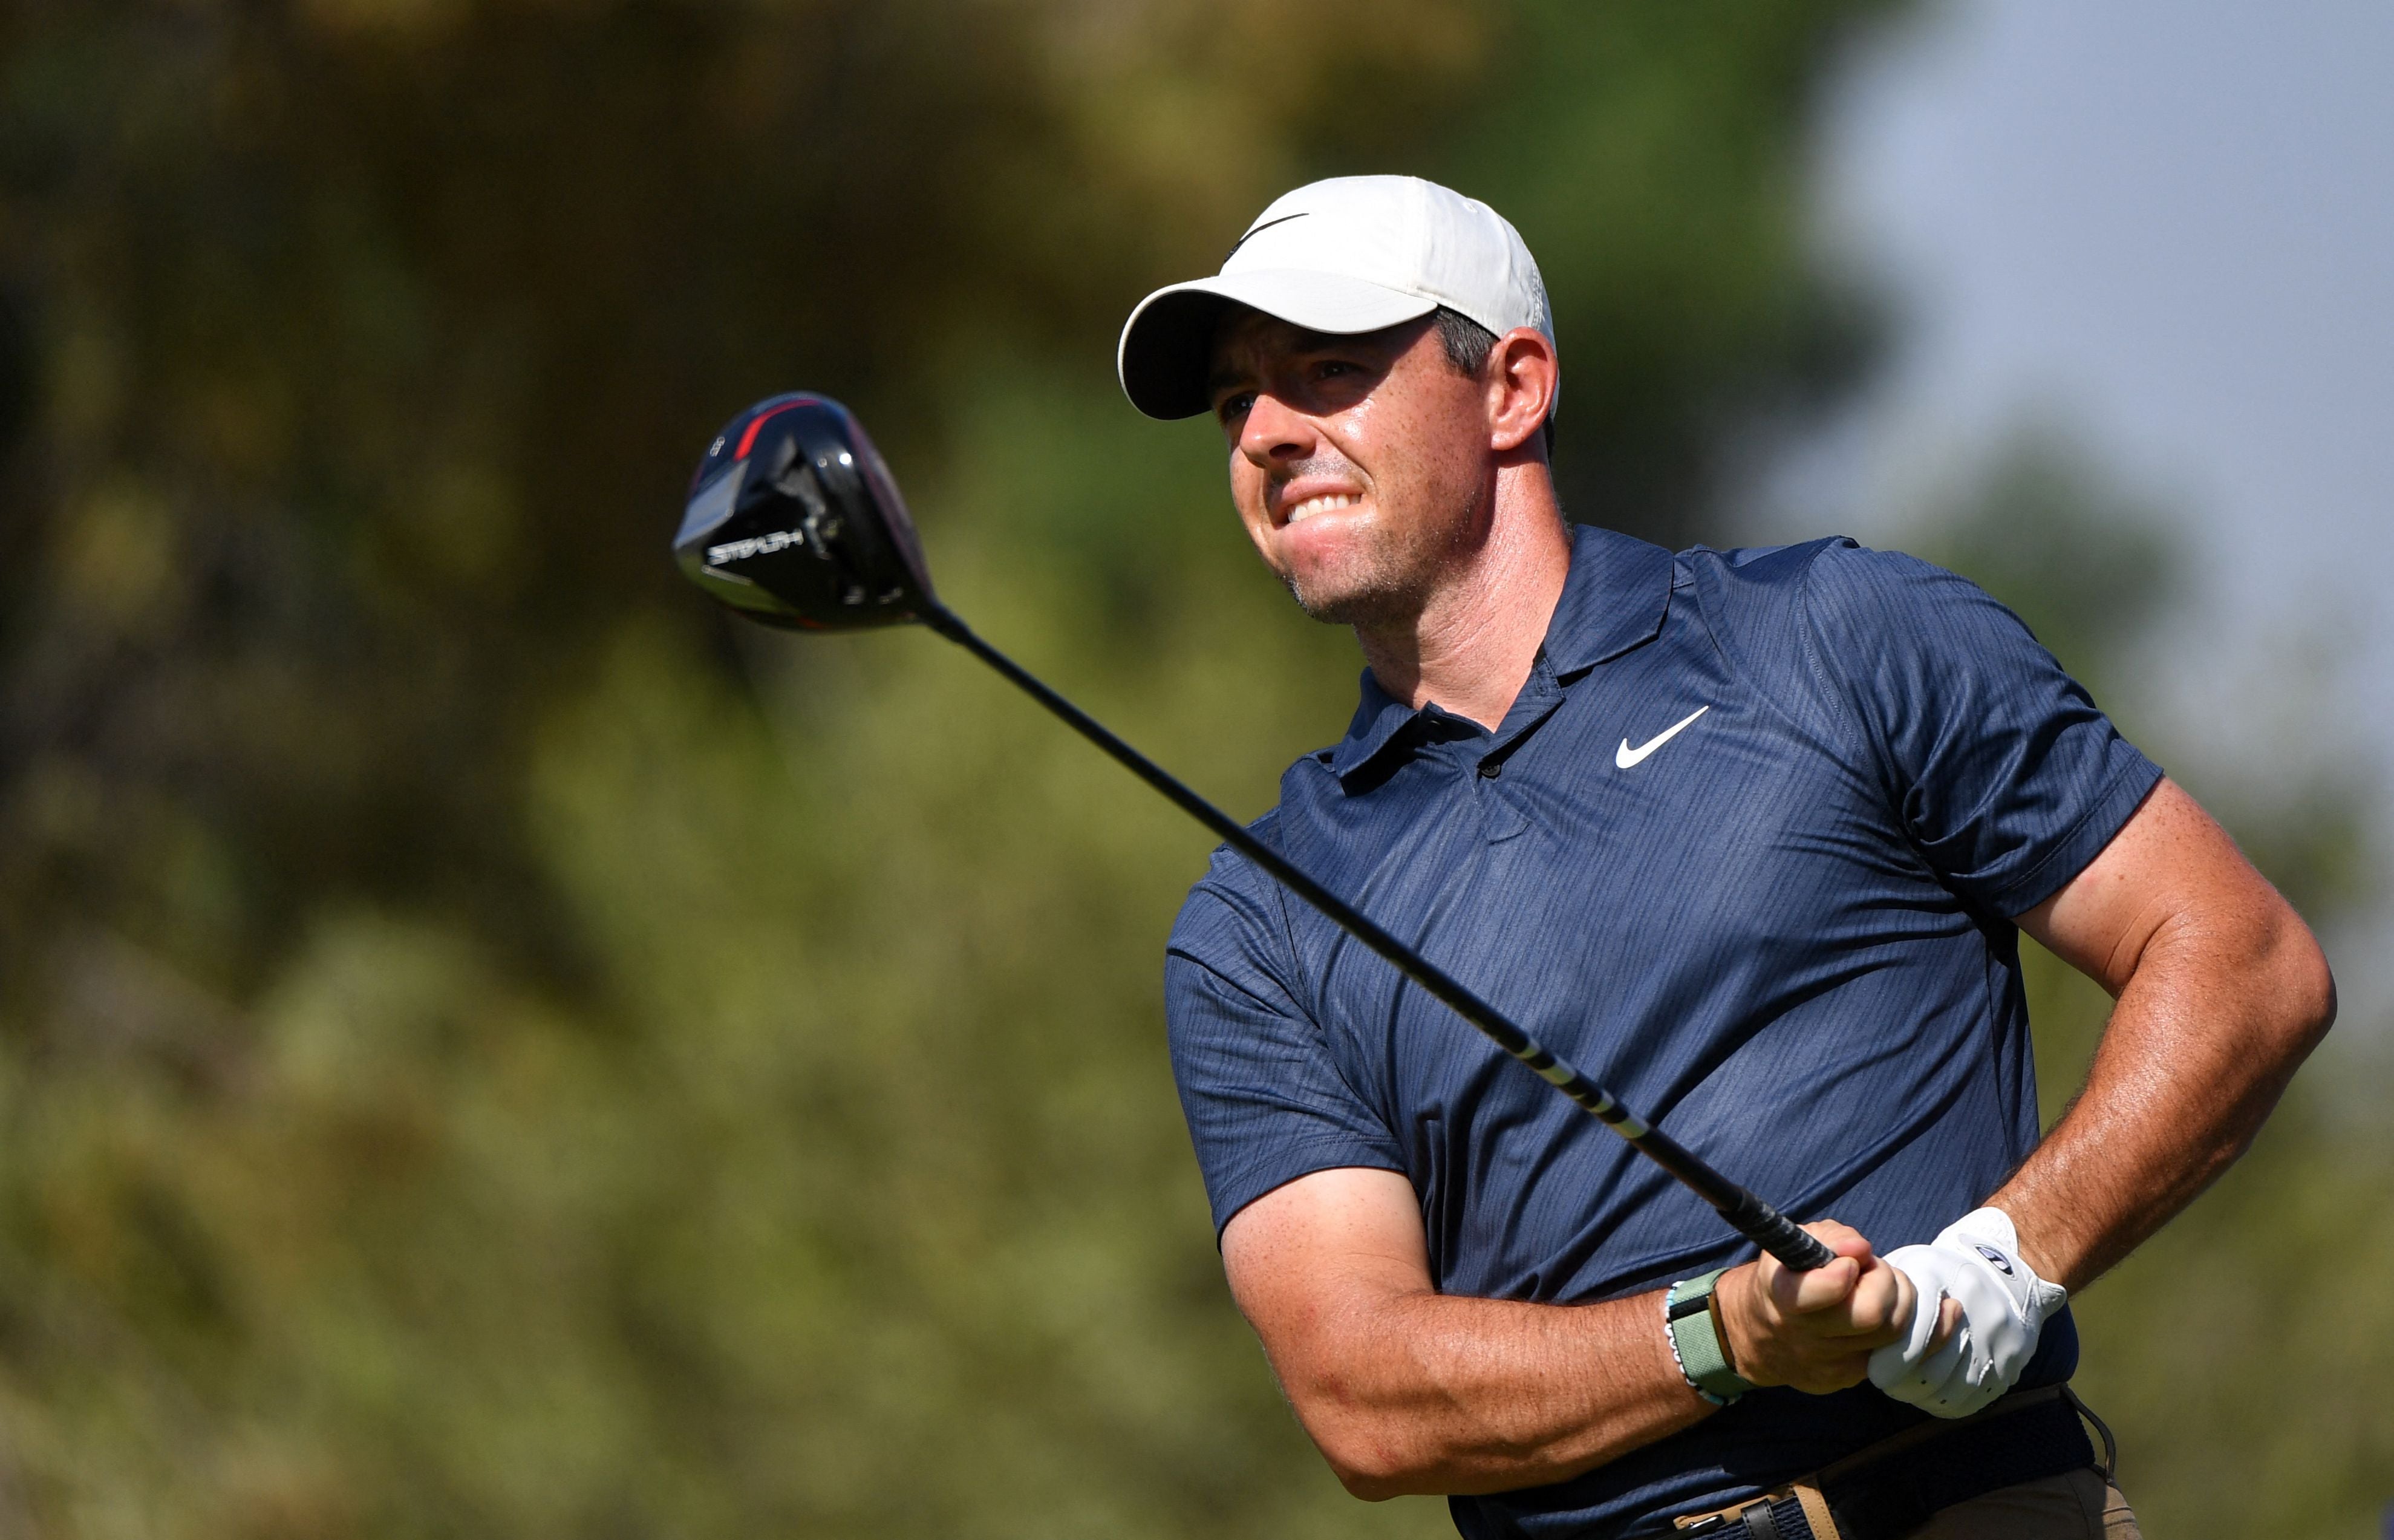 Rory McIlroy’s stance on the OWGR has divided opinion